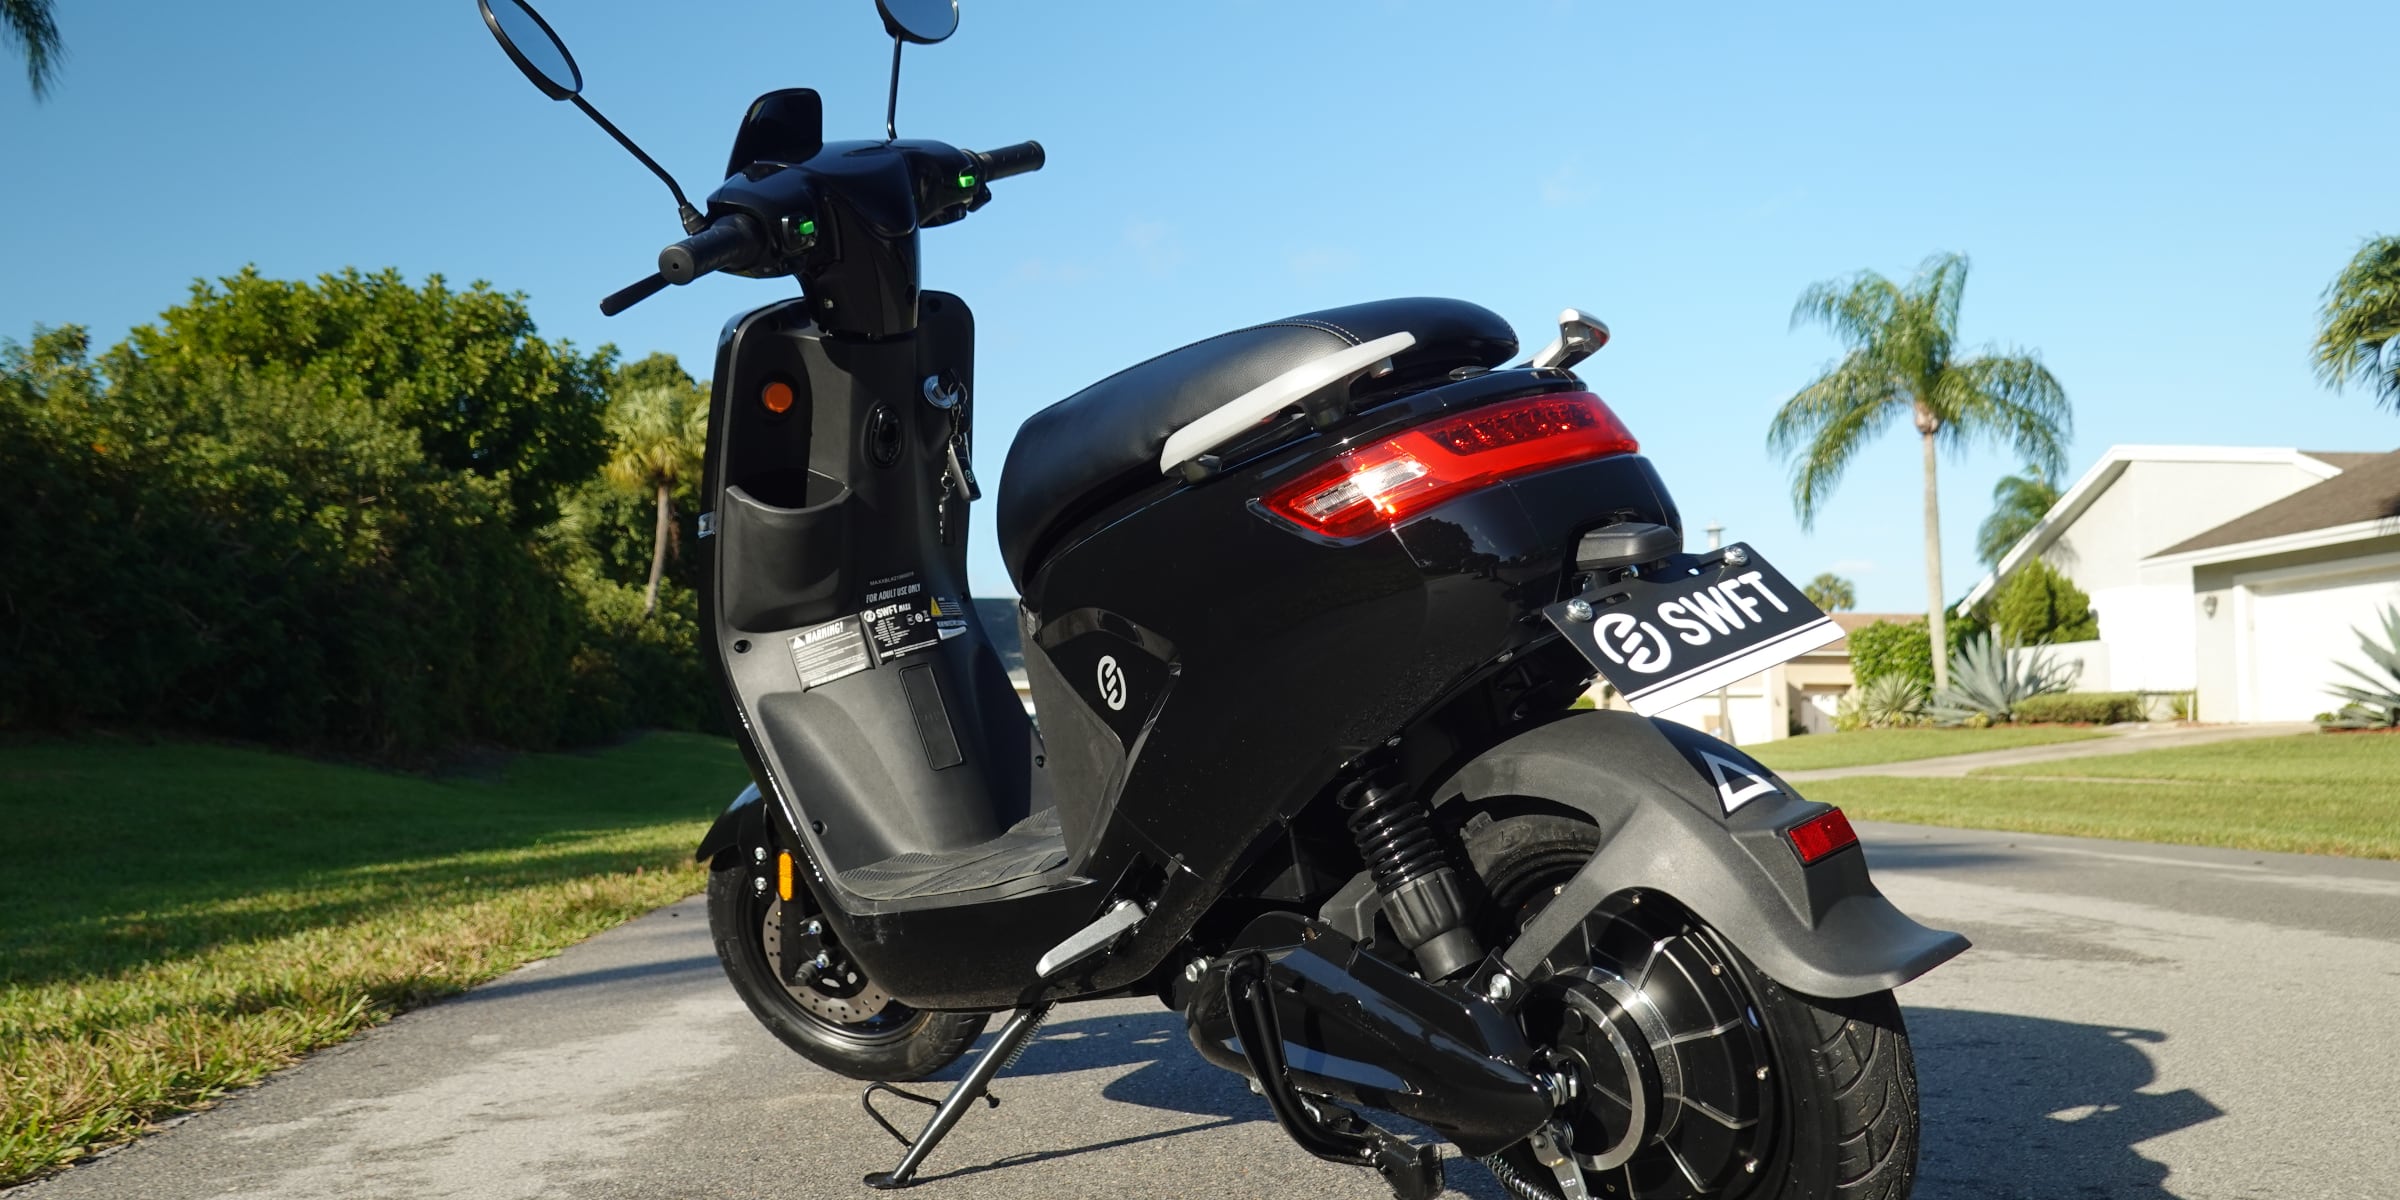 SWFT Maxx electric moped review: Low cost scooters never felt this